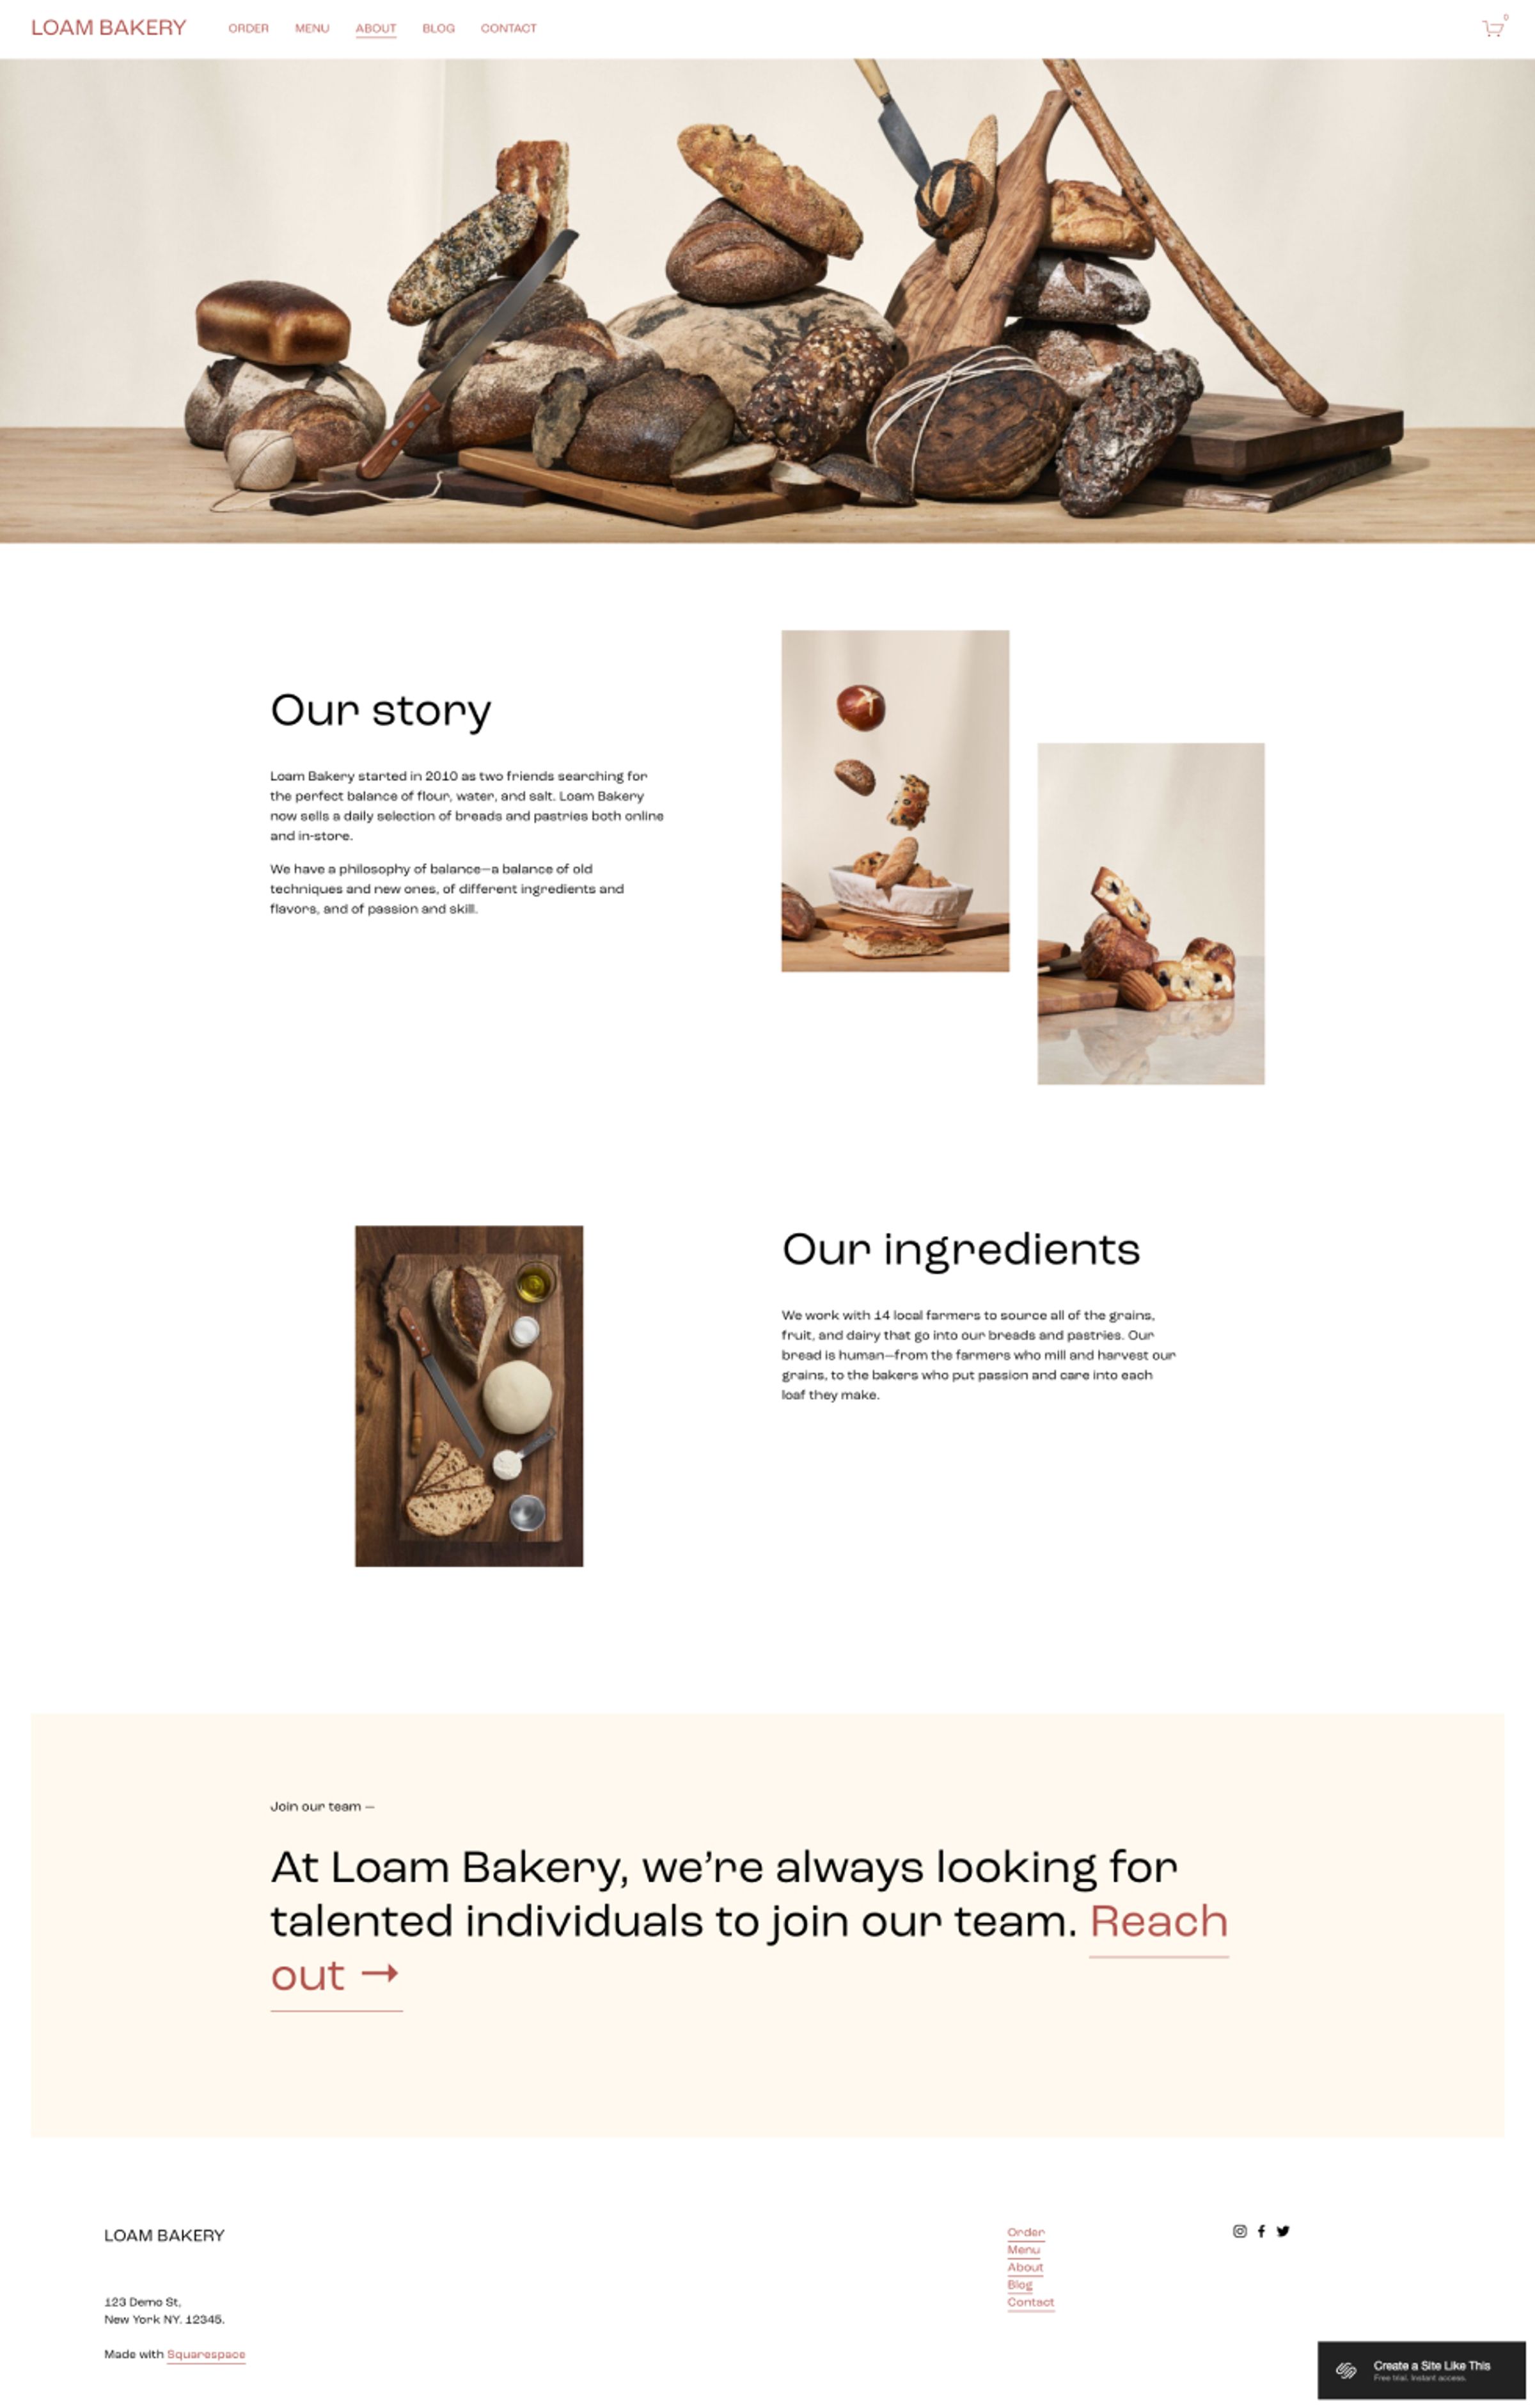 Squarespace Bakery Template using bread images